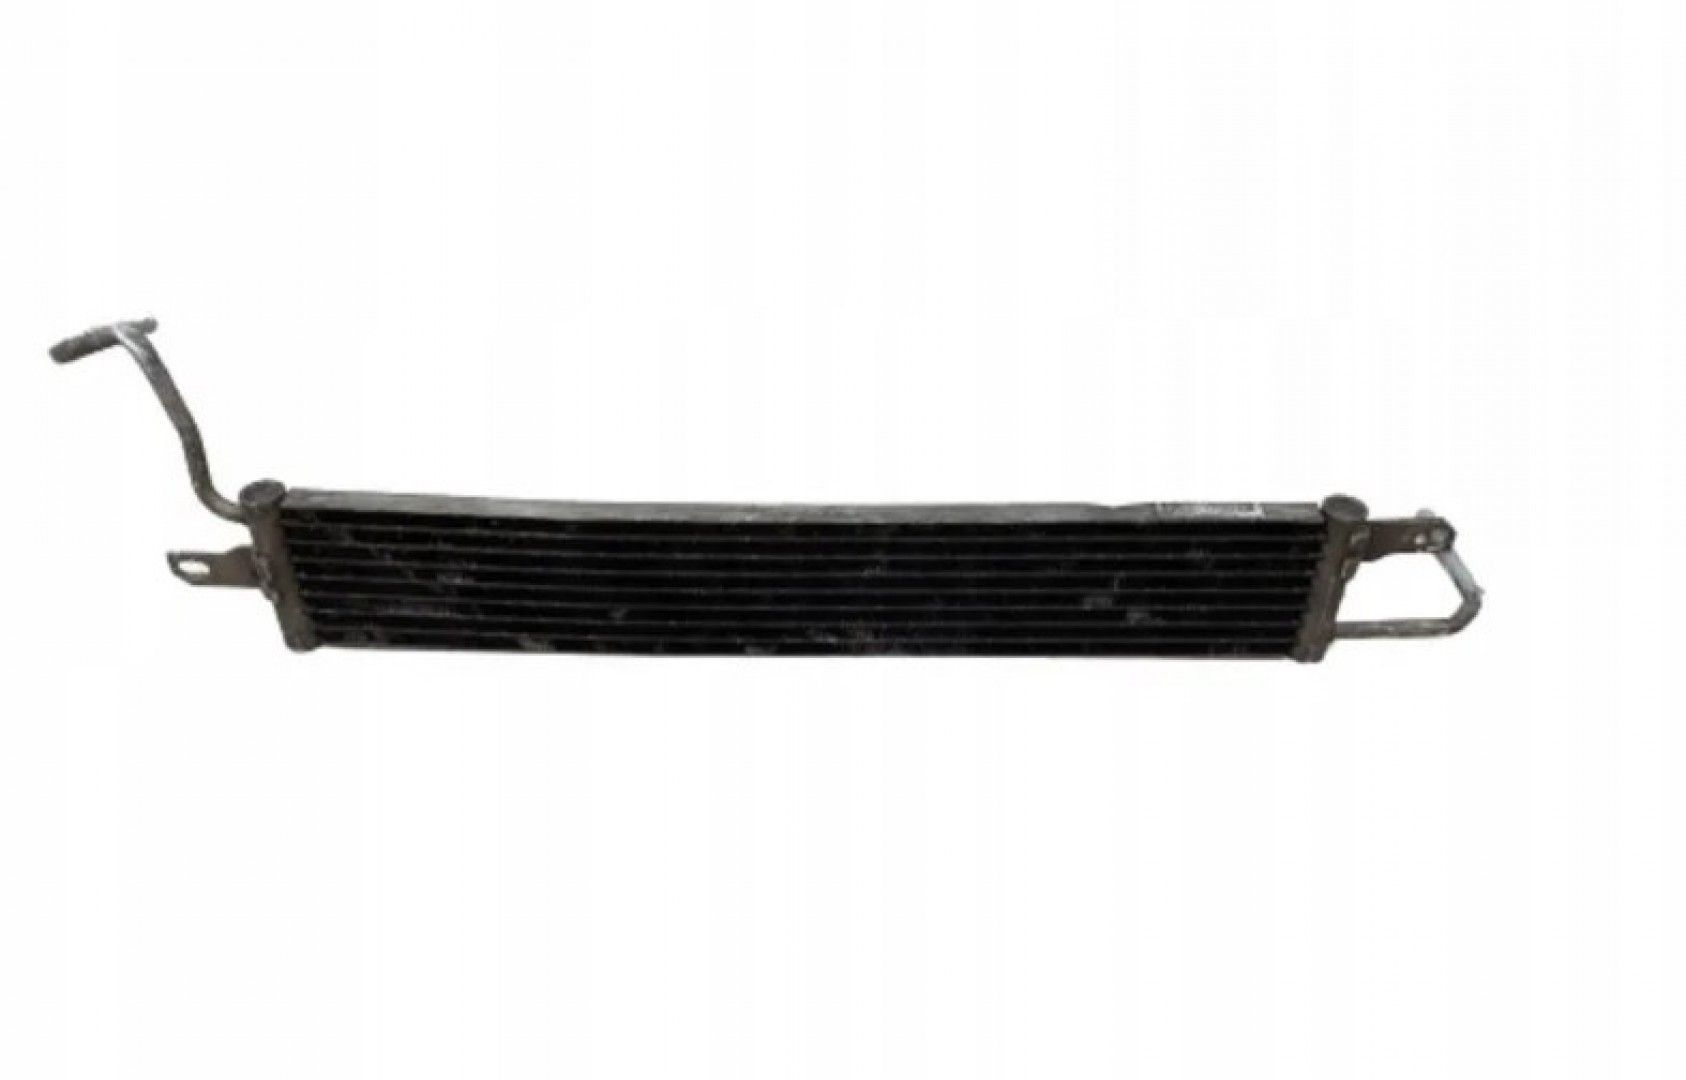 PIB500250 - Fuel Cooler, Auxiliary - 3.6L V8 Genuine Land Rover